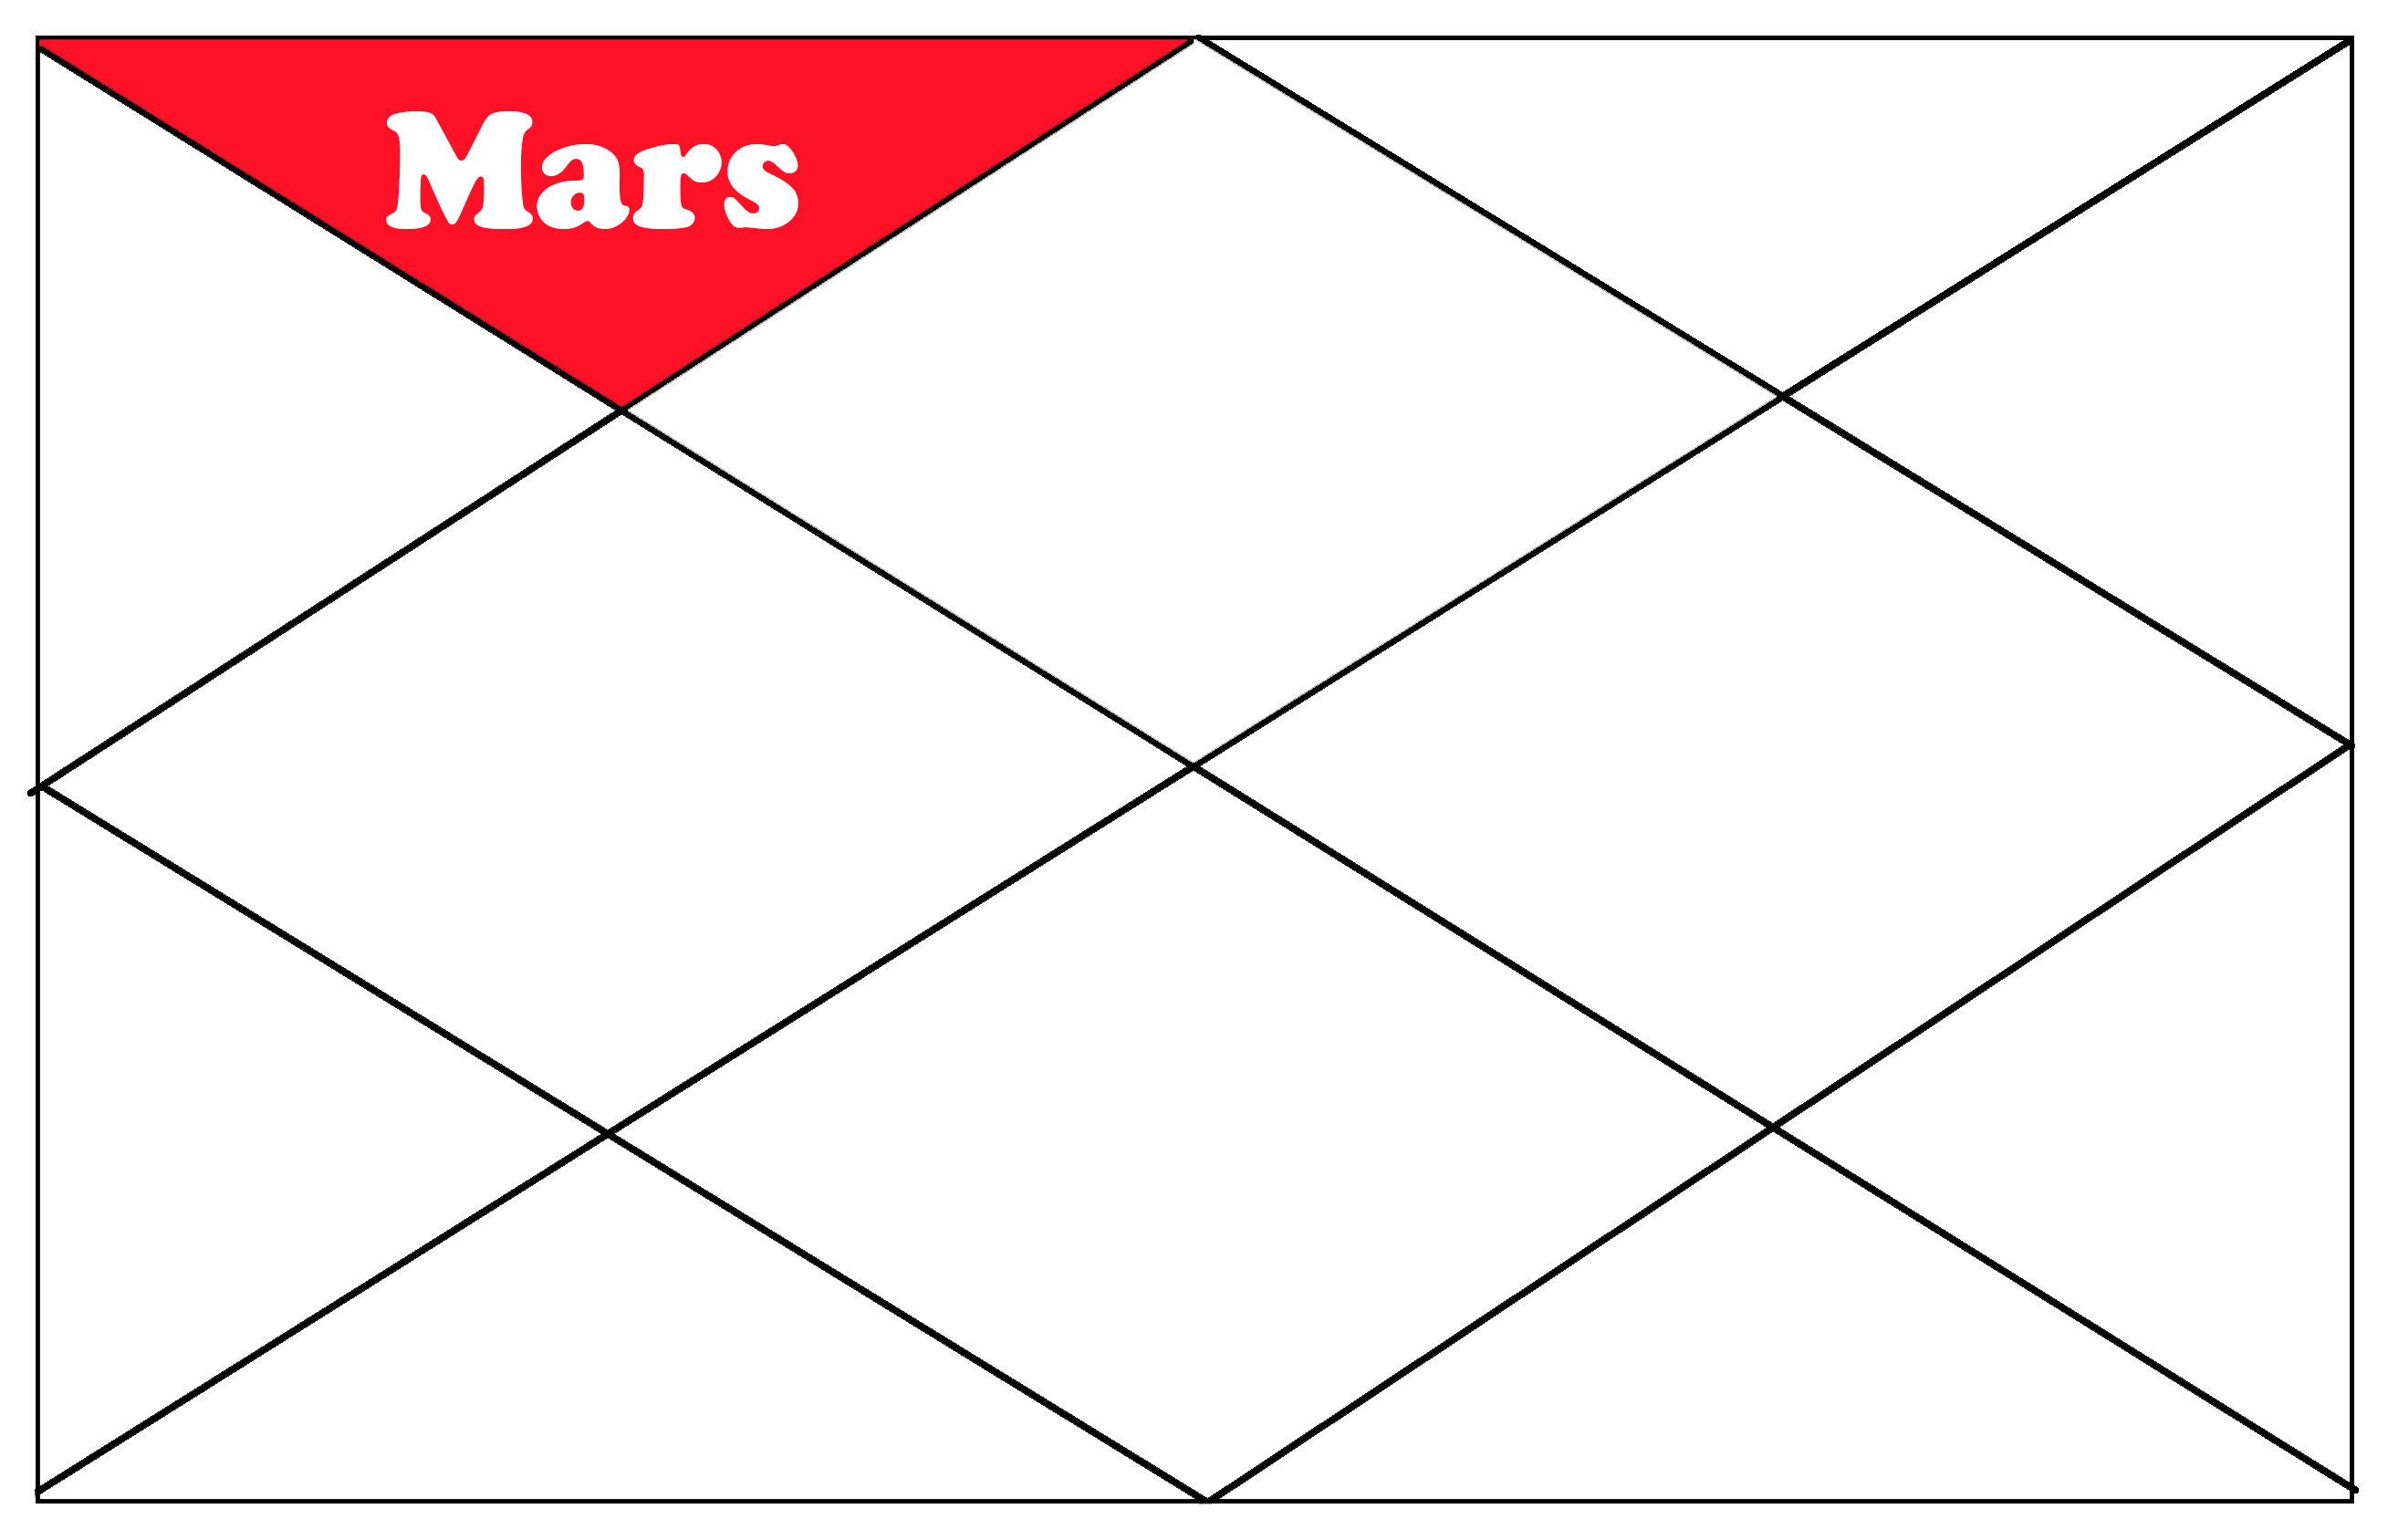 Mars in the 2nd house